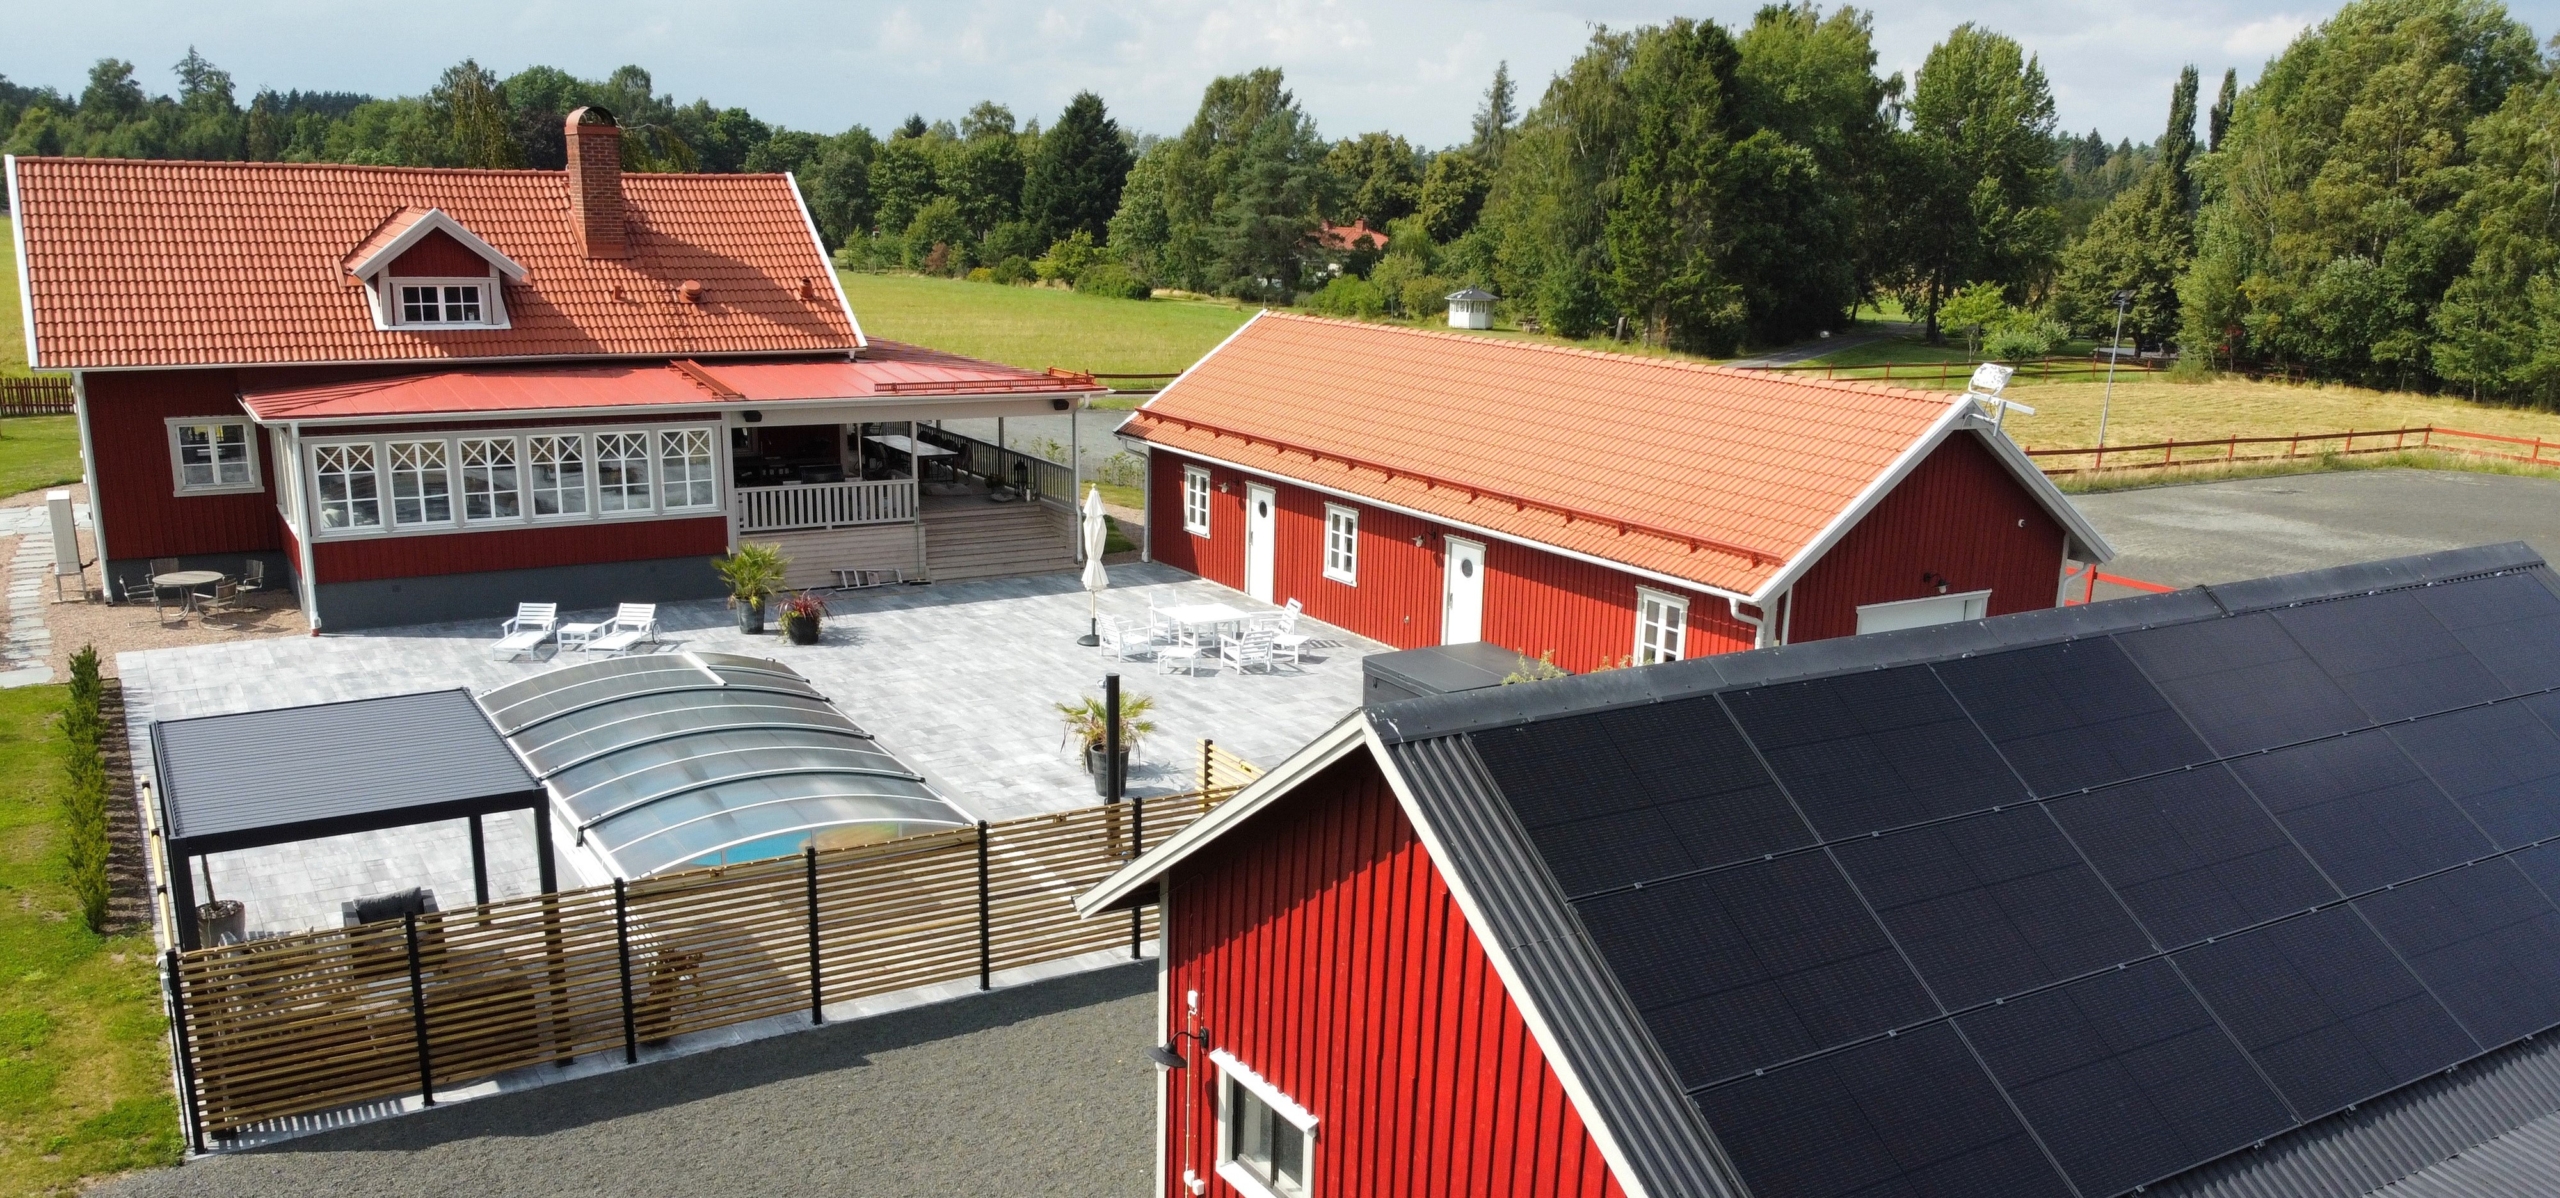 Björkelund - where solar energy is put to great use